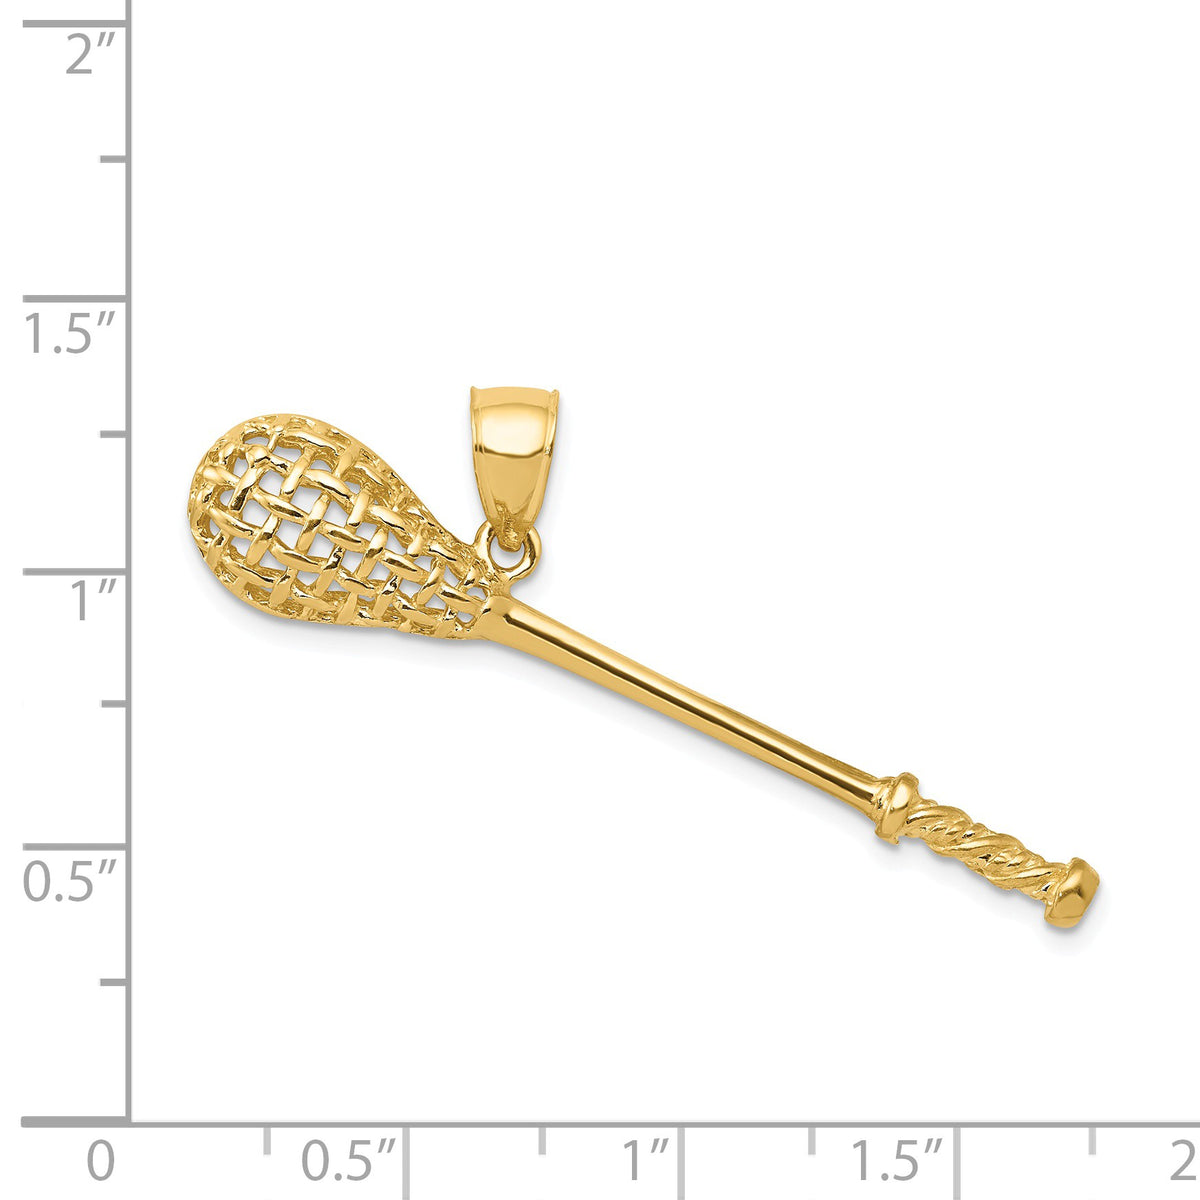 Alternate view of the 14k Yellow Gold Large 3D Lacrosse Stick Pendant by The Black Bow Jewelry Co.